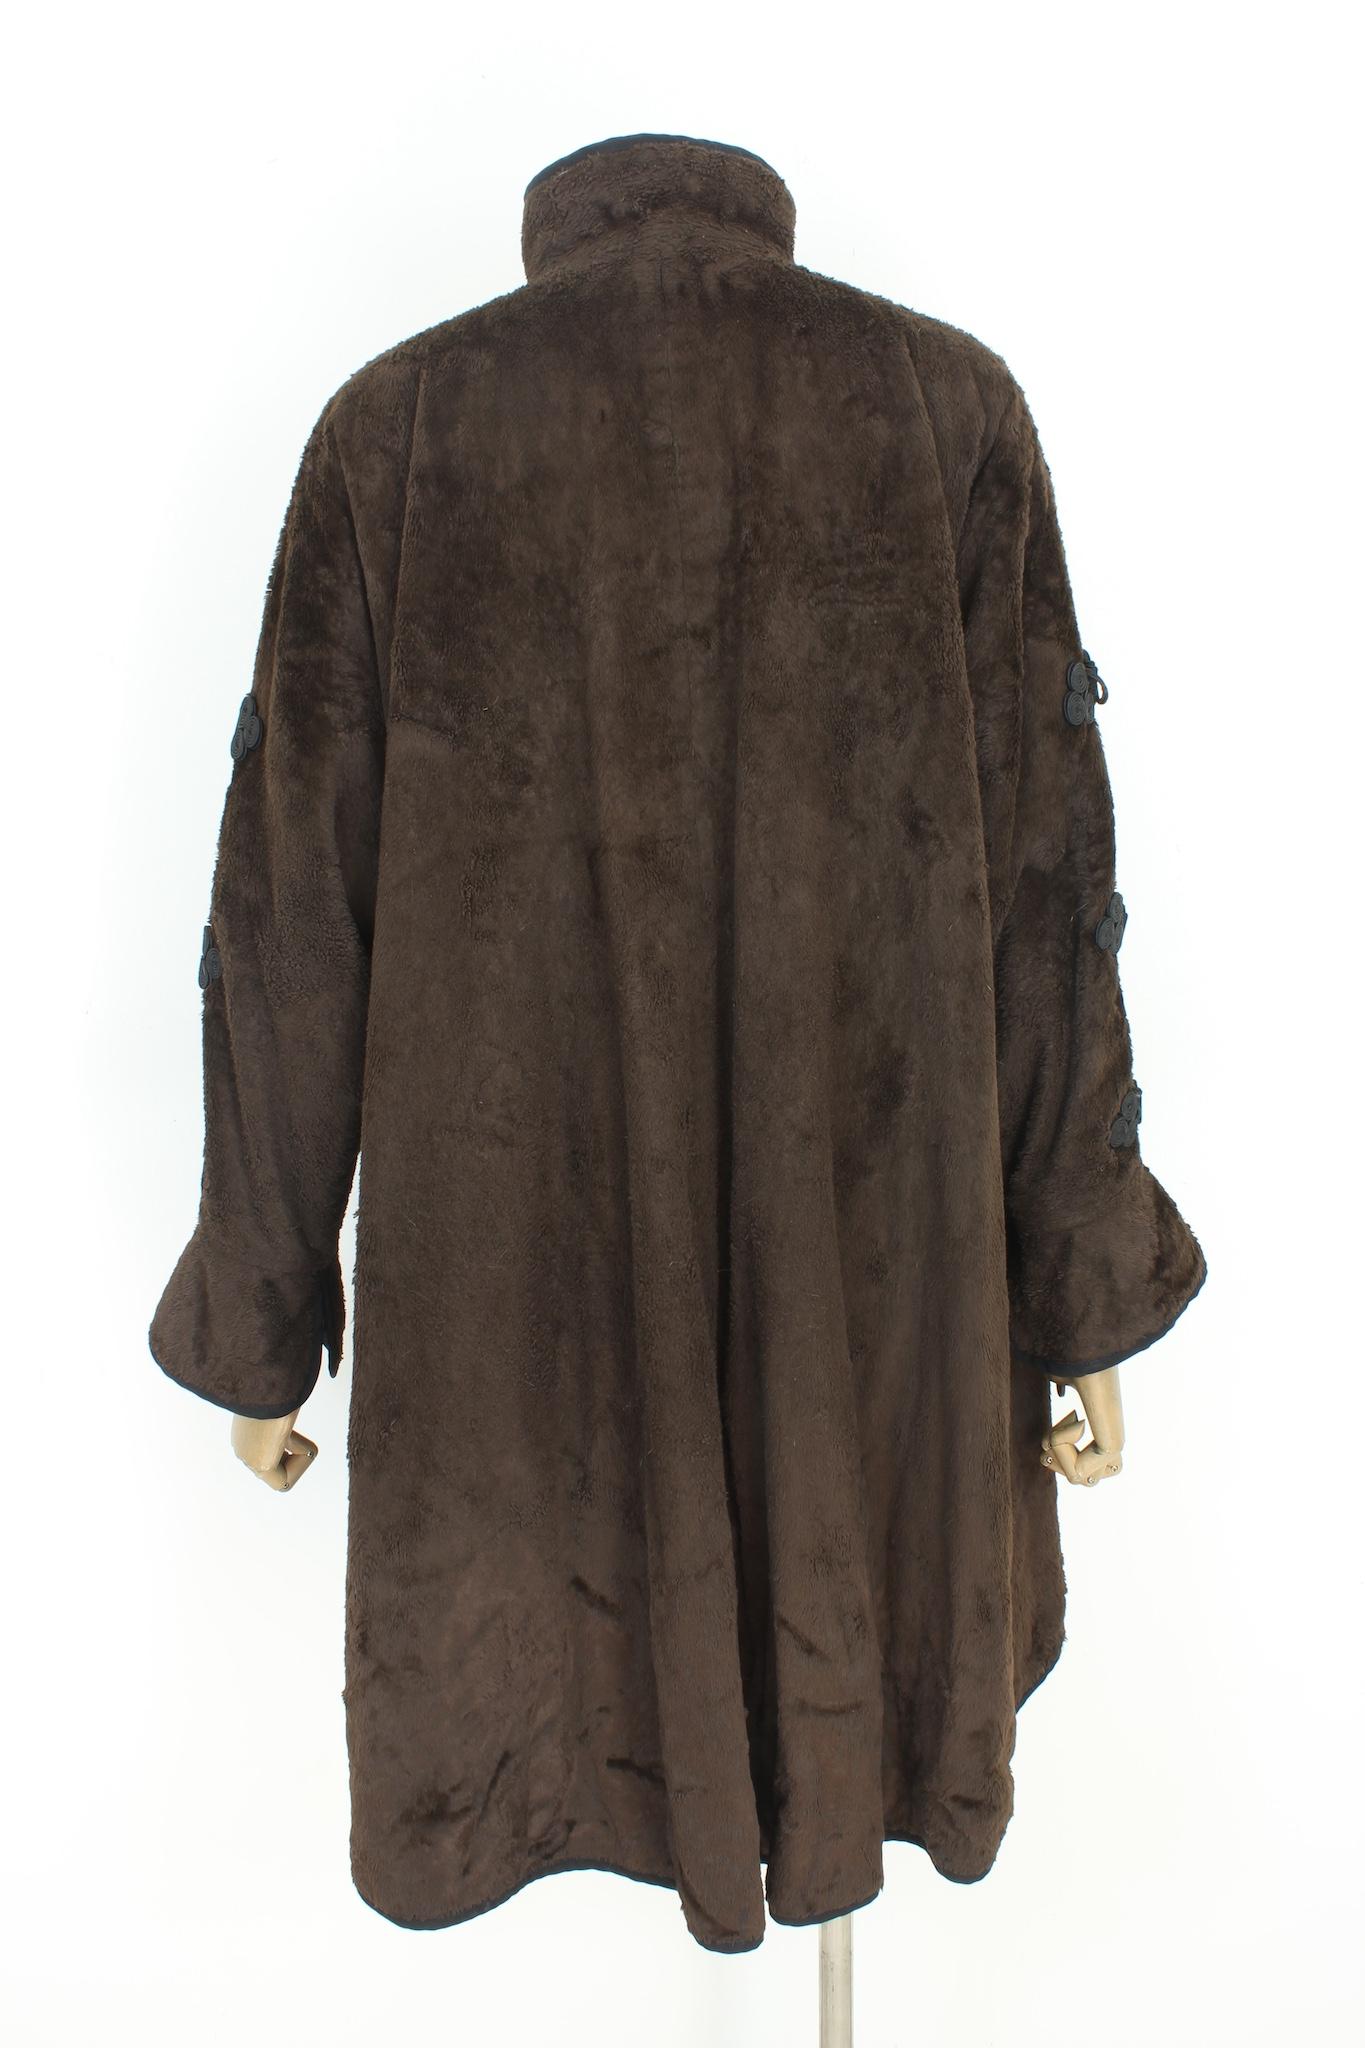 Fendi vintage 80s cape coat. Oversized brown and black coat, embroidery on both the button closure on the neck and on the sleeves. The cape is longer on the back. Hidden logo buttons. Side pockets. Fabric 62% cotton, 36% viscose. Made in